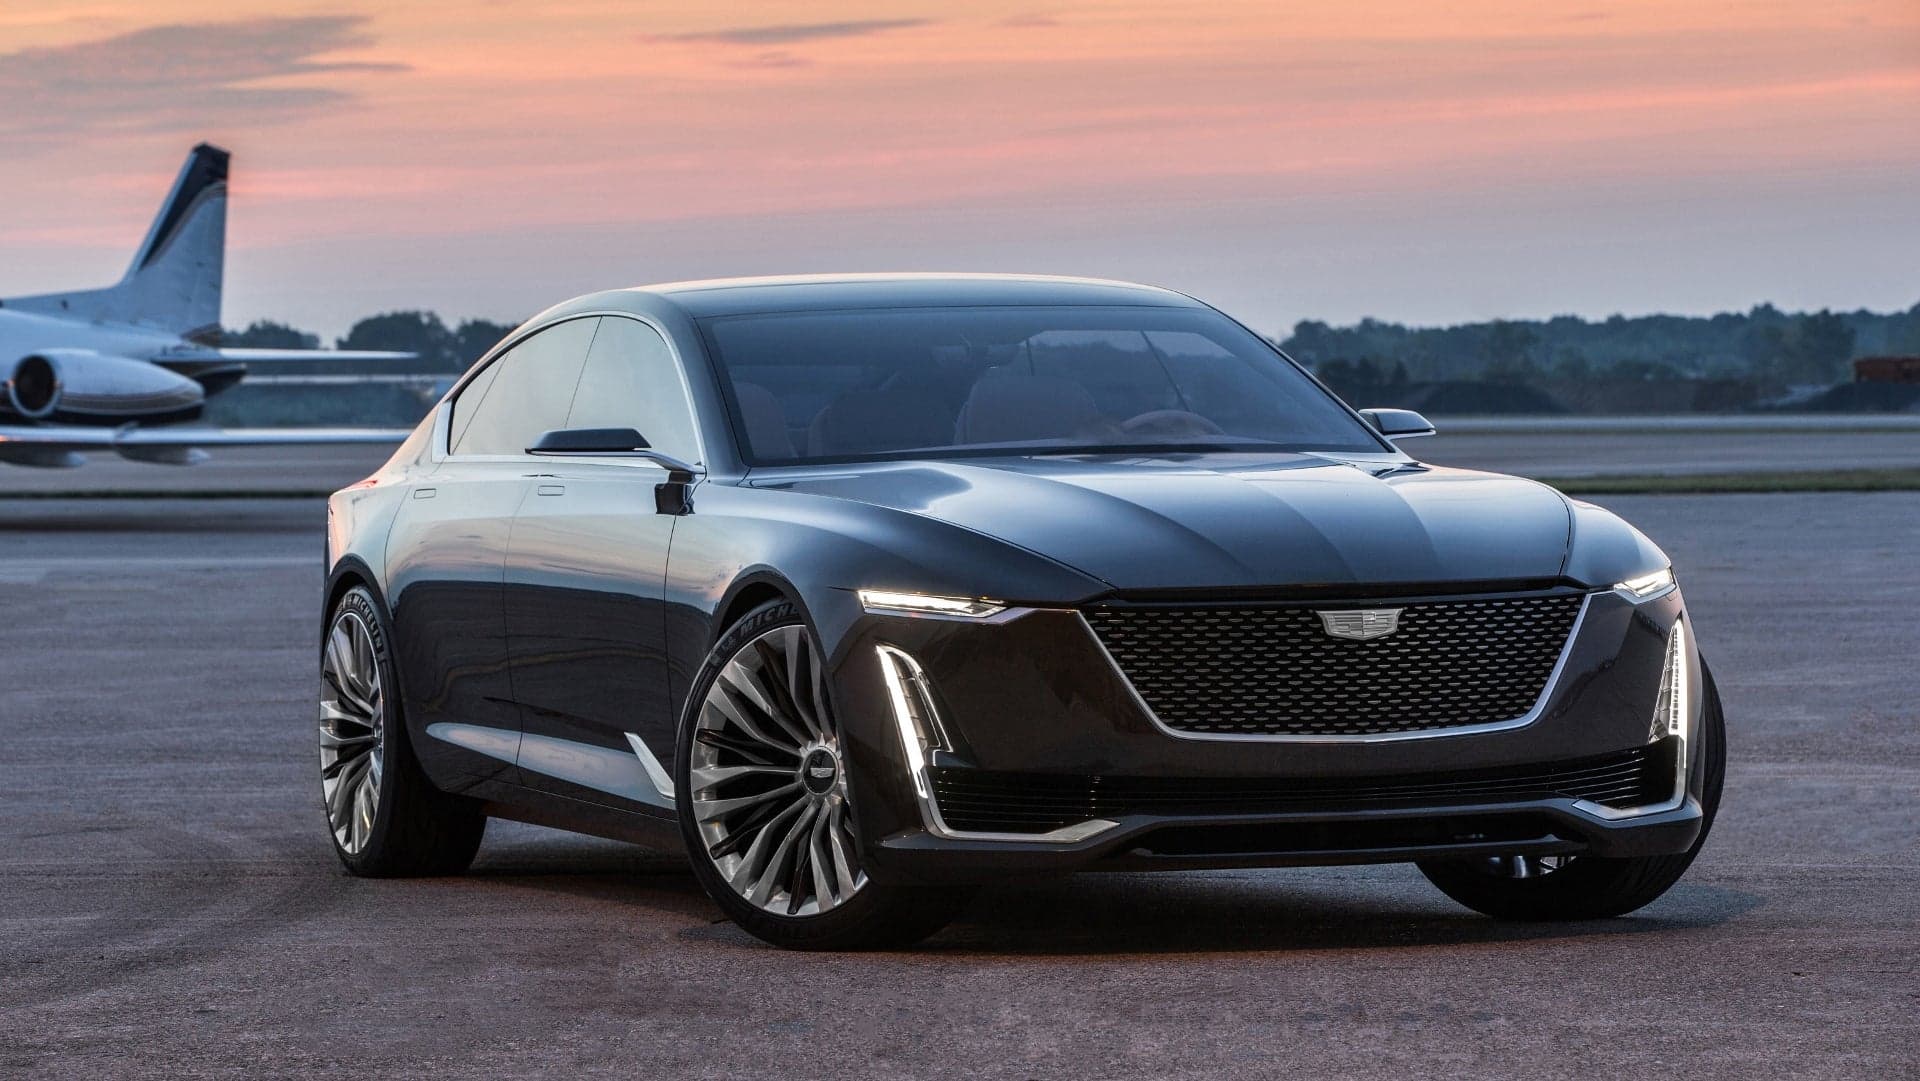 Cadillac to Evolve Into GM’s Tesla-Fighting Brand, Develop New EVs: Report